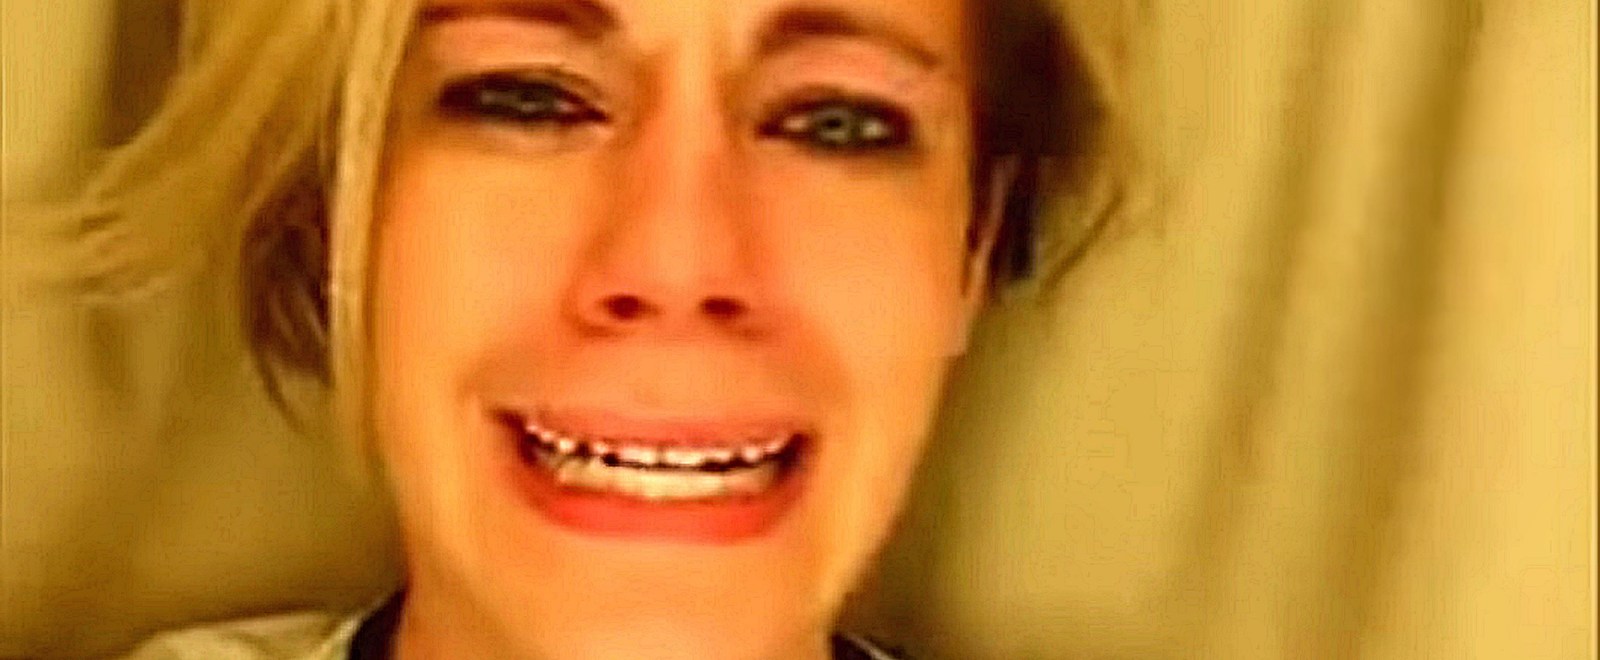 Chris Crocker From Leave Britney Alone Reacts To Britney Spears 